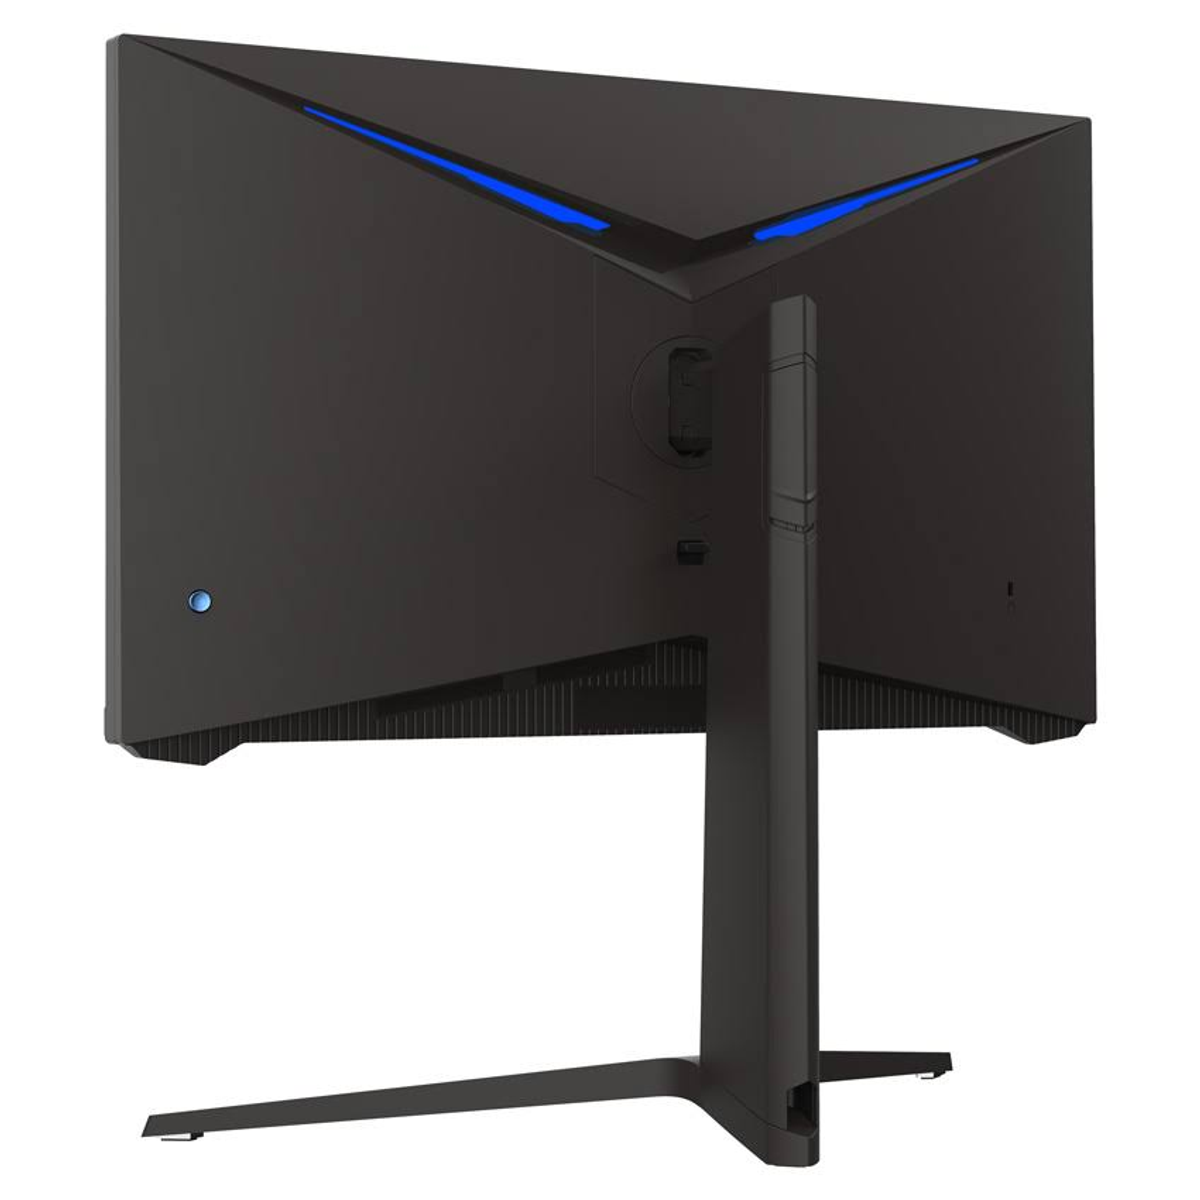 LC-M25-FHD-144 ms POWER LC (1 Hz nativ) Full-HD 25 144 , Zoll 144 Reaktionszeit Hz Monitor, , Gaming-Monitor